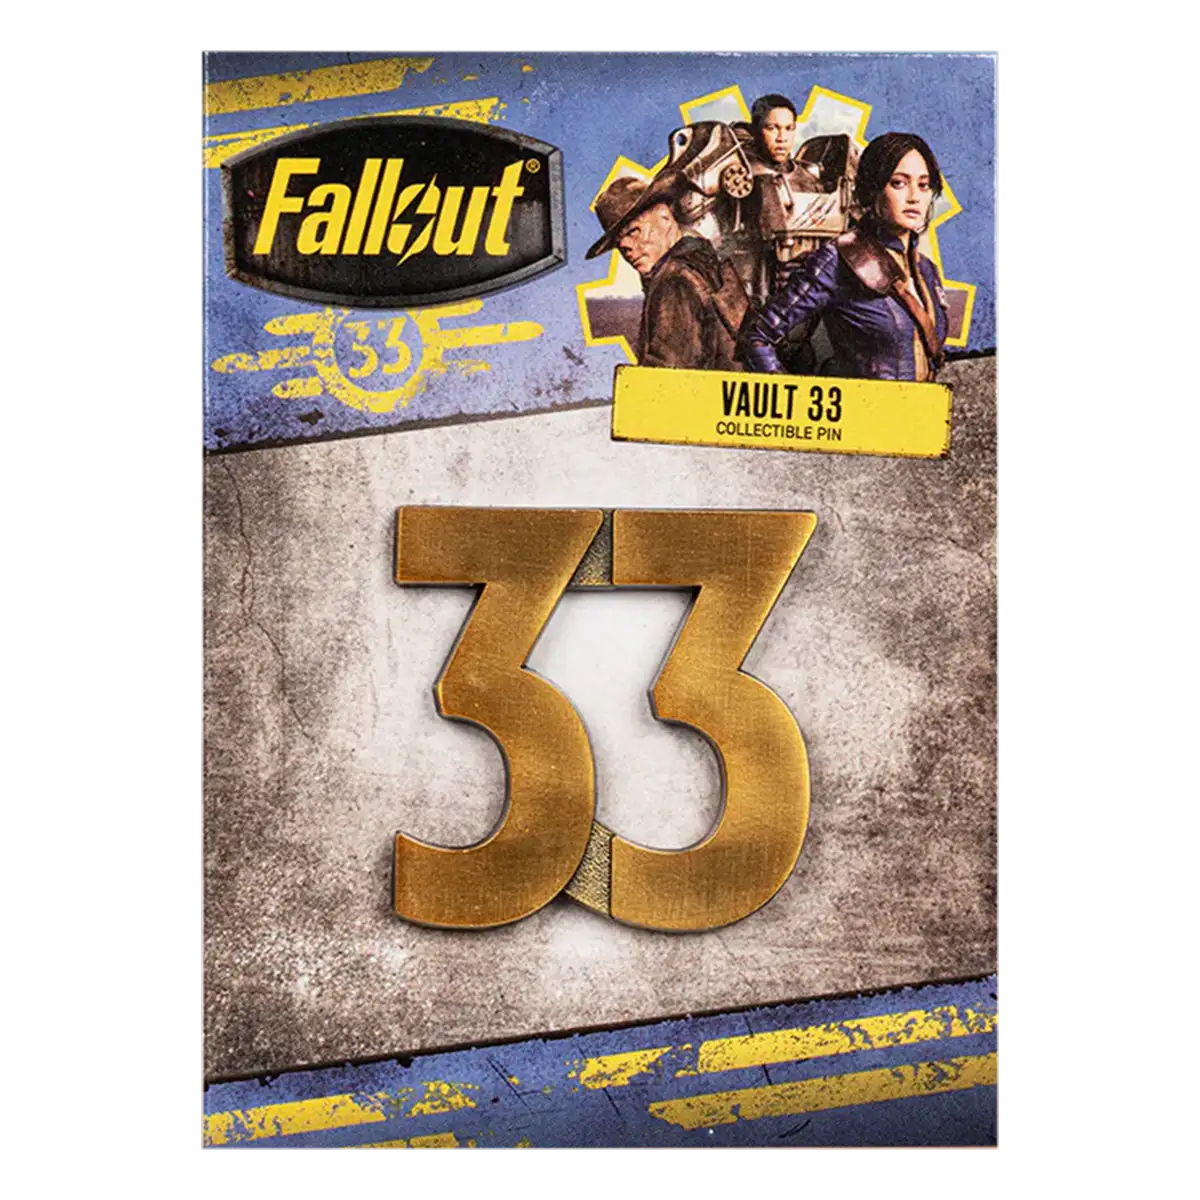 Fallout Pin "Vault 33" Cover